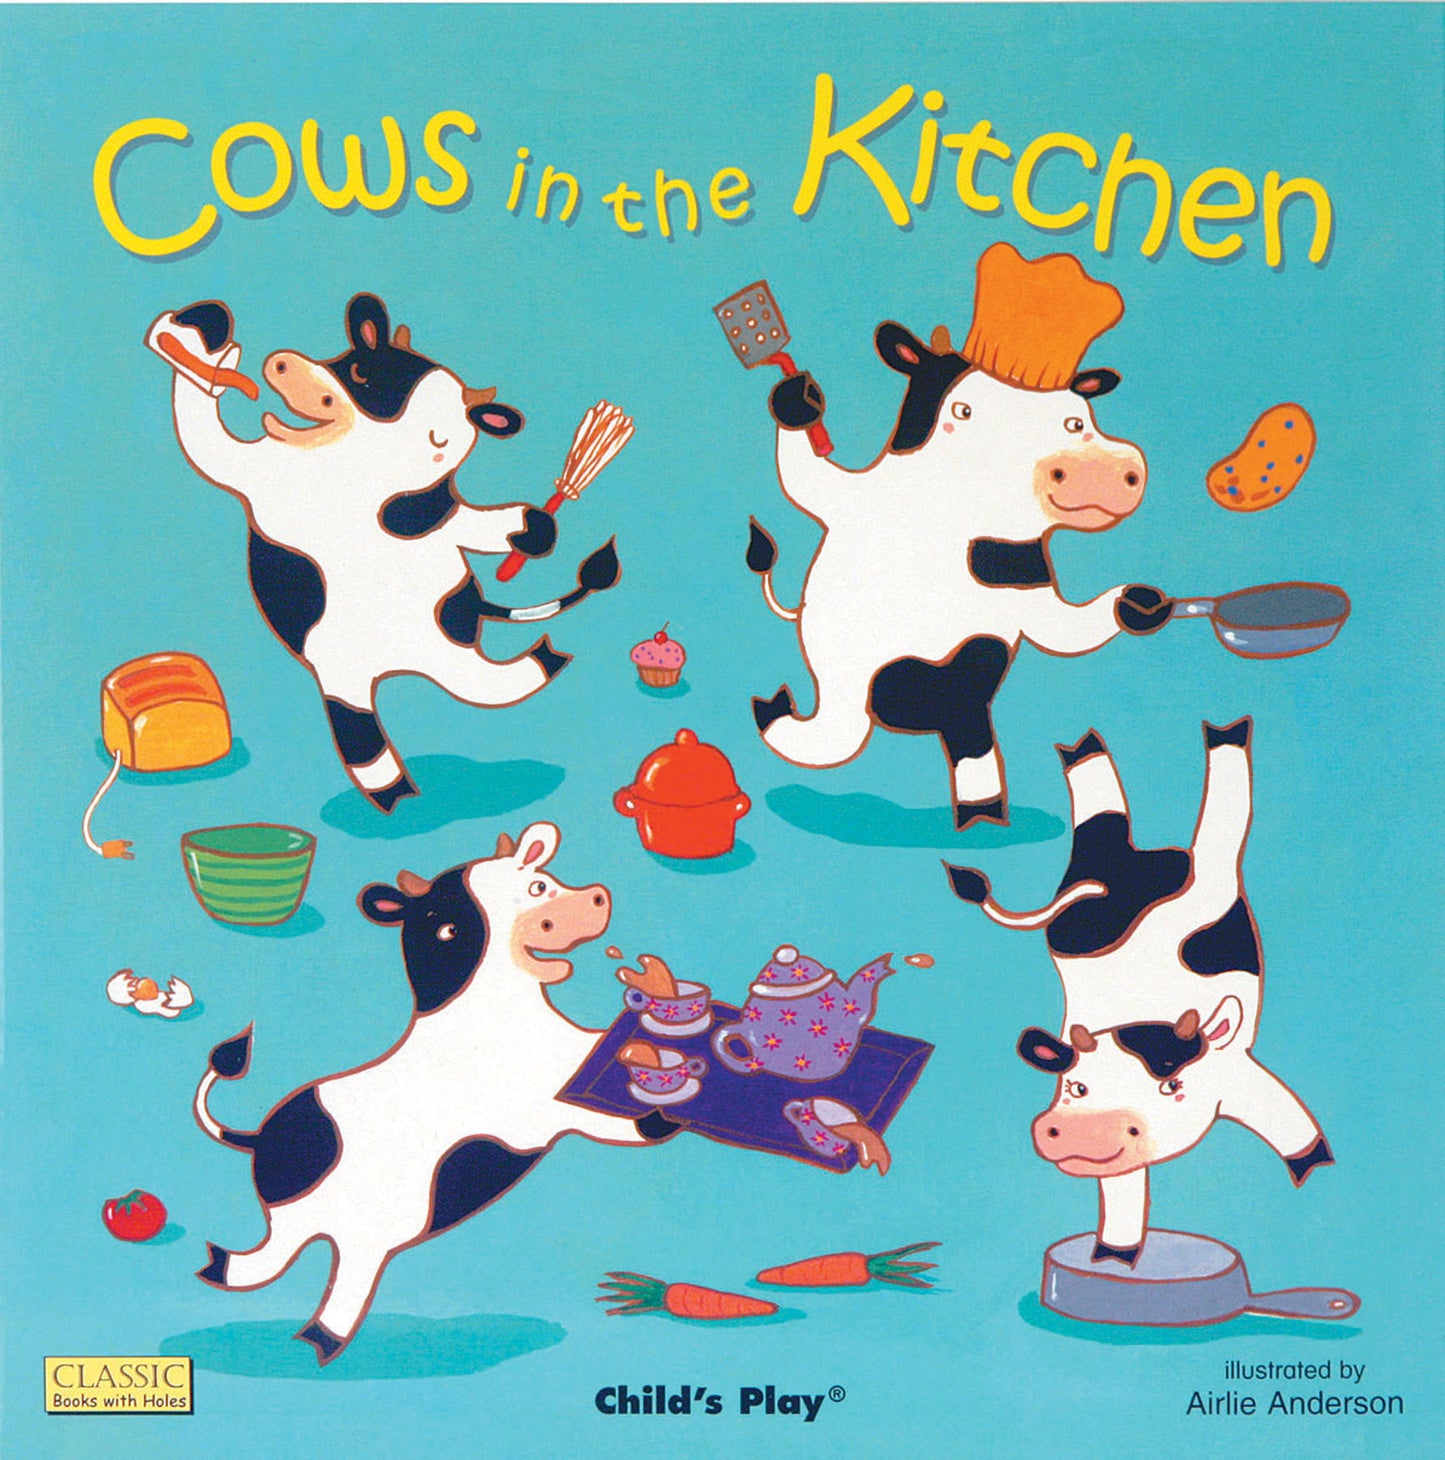 Cows in the Kitchen (Softcover Edition)